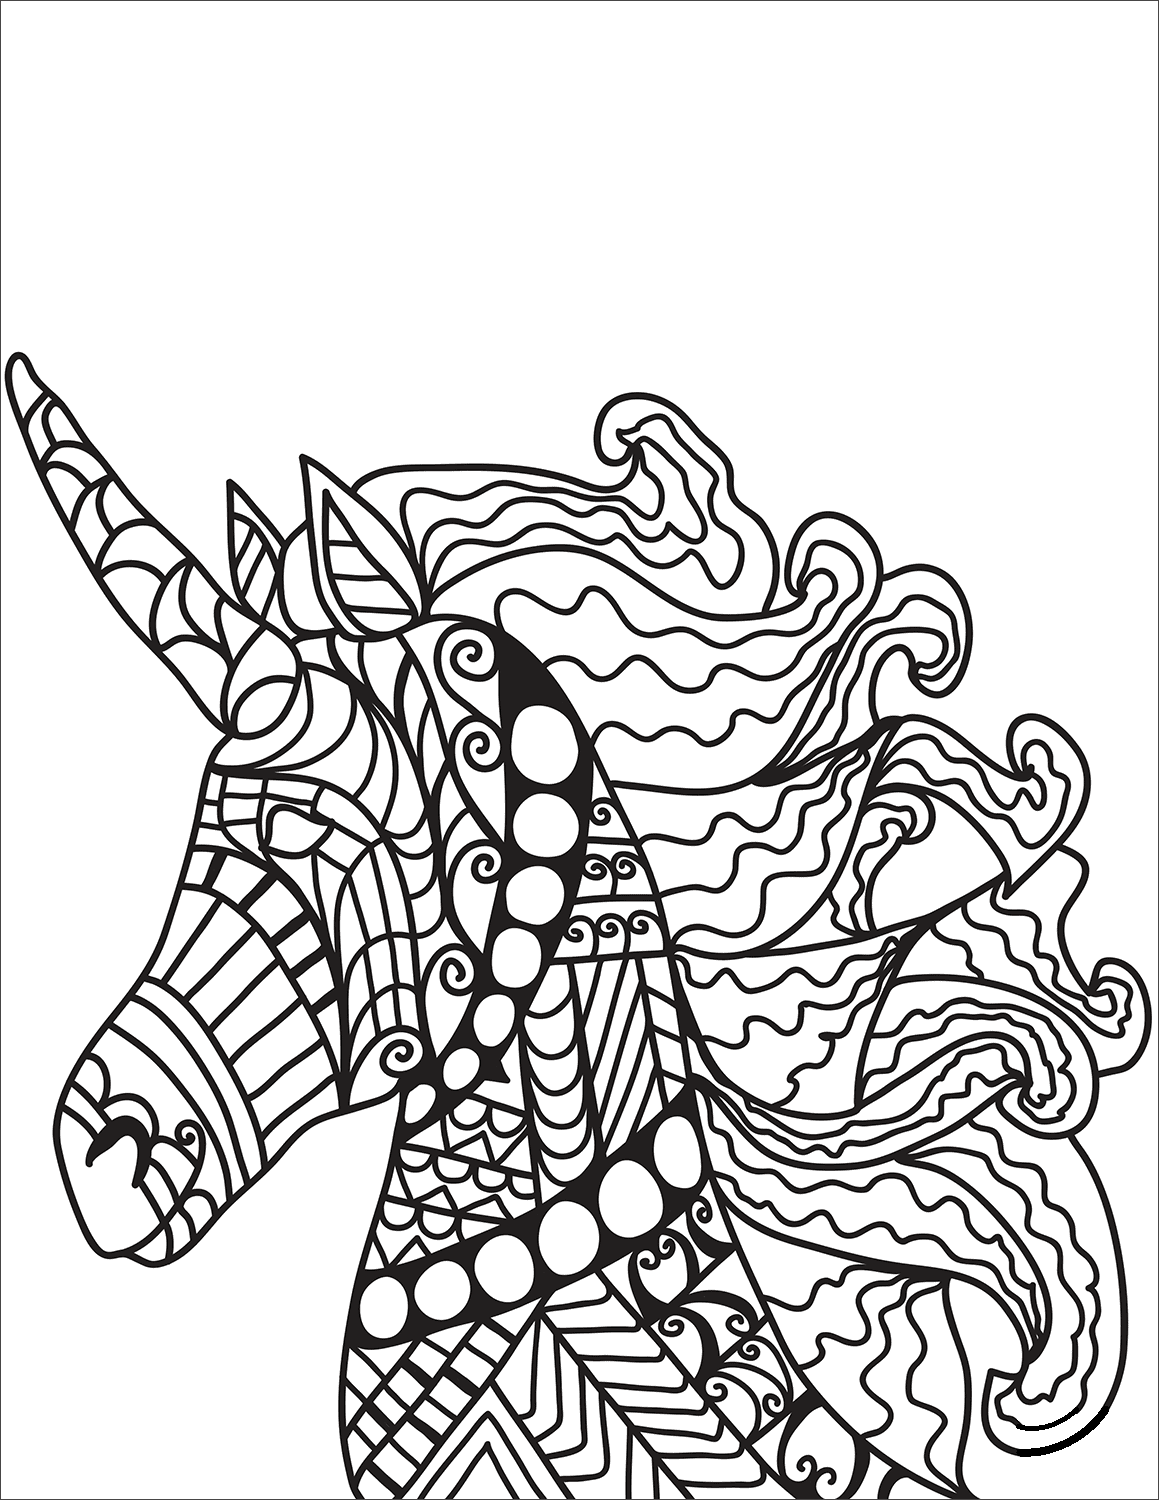 Unicorn Zentangle Coloring Page - Free Printable Coloring ...